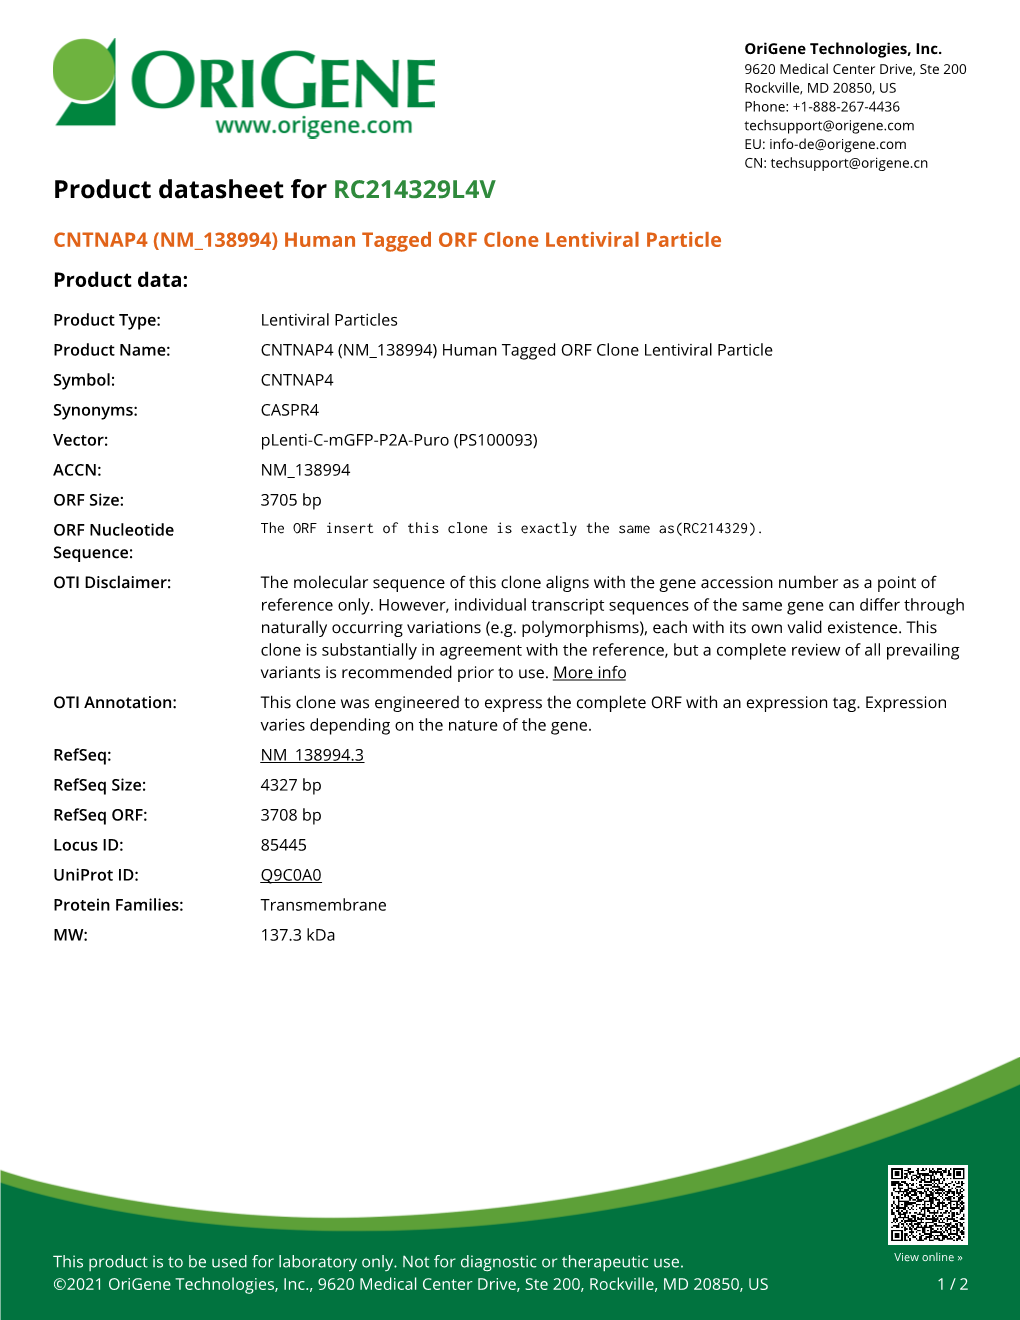 CNTNAP4 (NM 138994) Human Tagged ORF Clone Lentiviral Particle Product Data